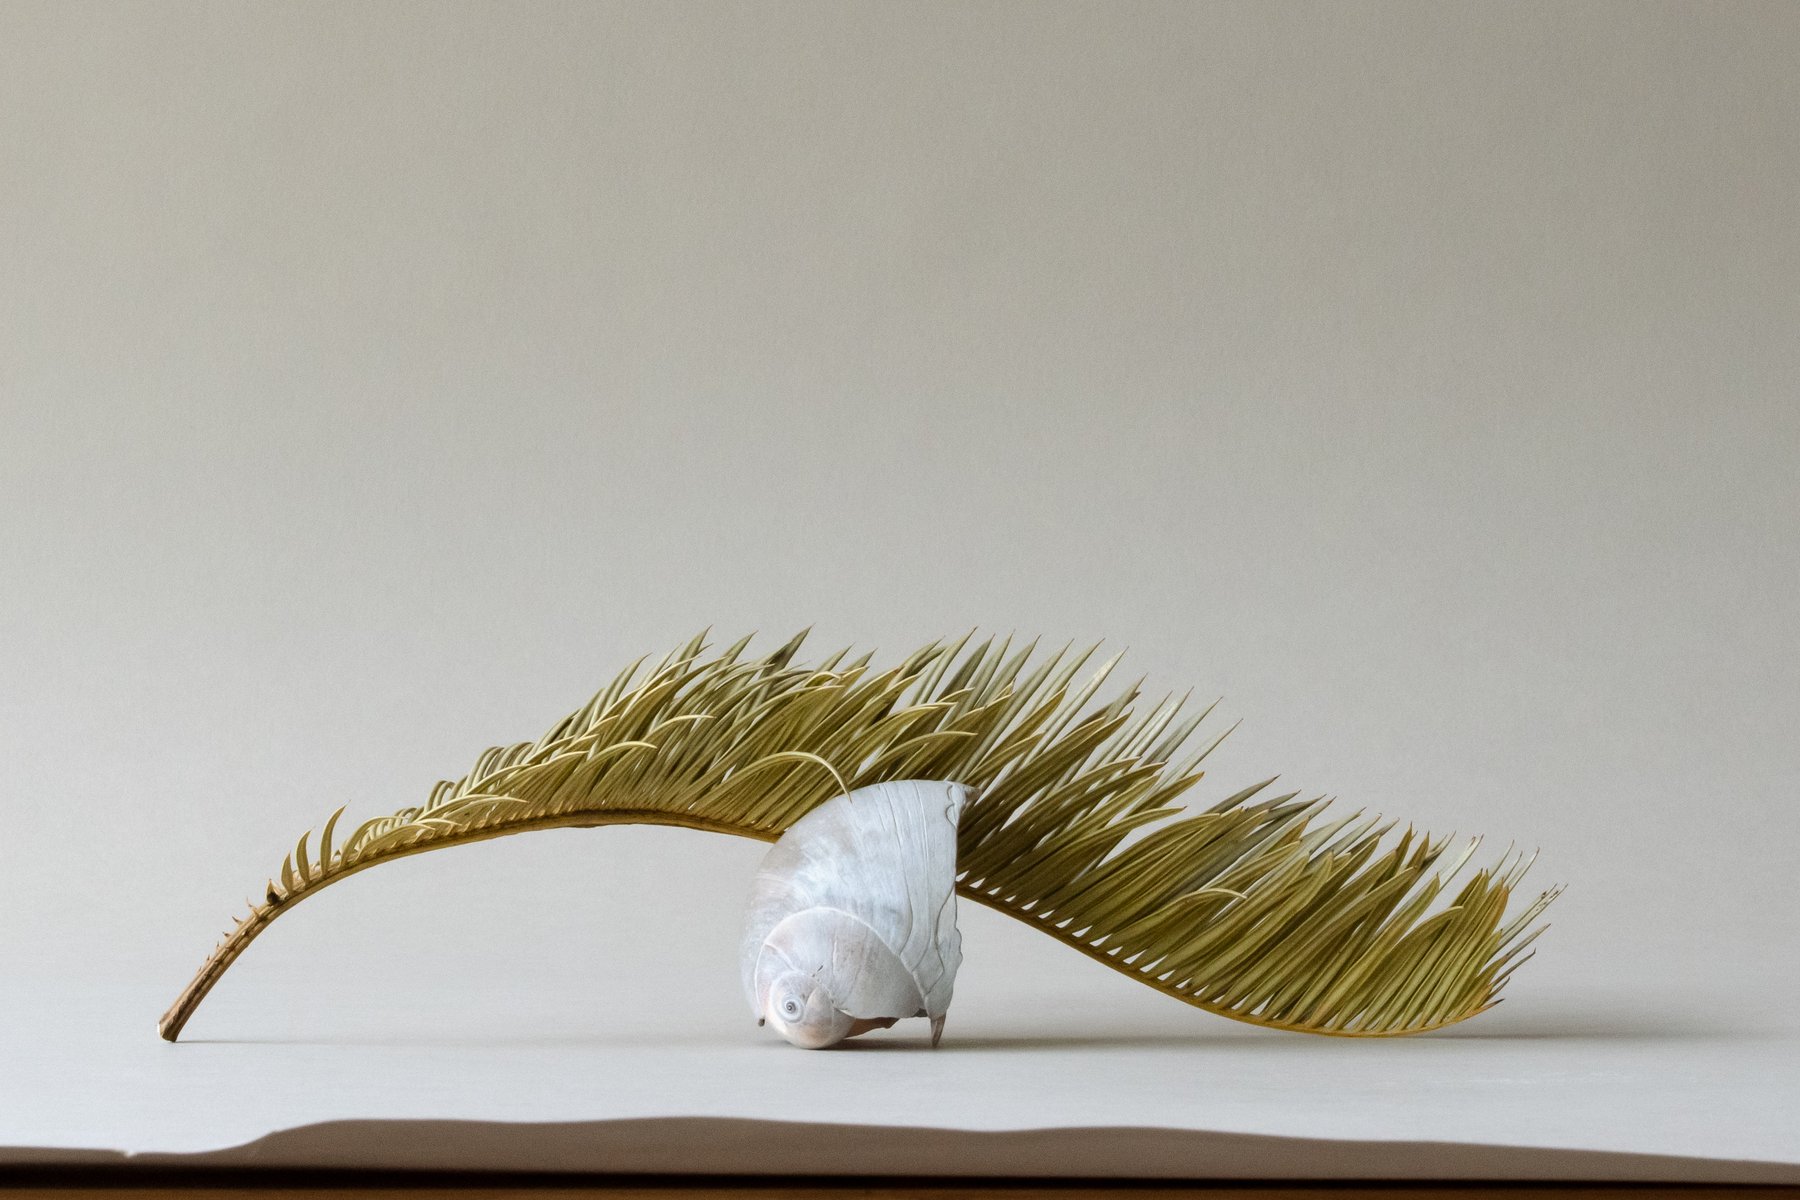  Personal Work
A partially dried sago palm frond resting horizontally behind a broken white shell against a beige paper backdrop. by Sydney SG